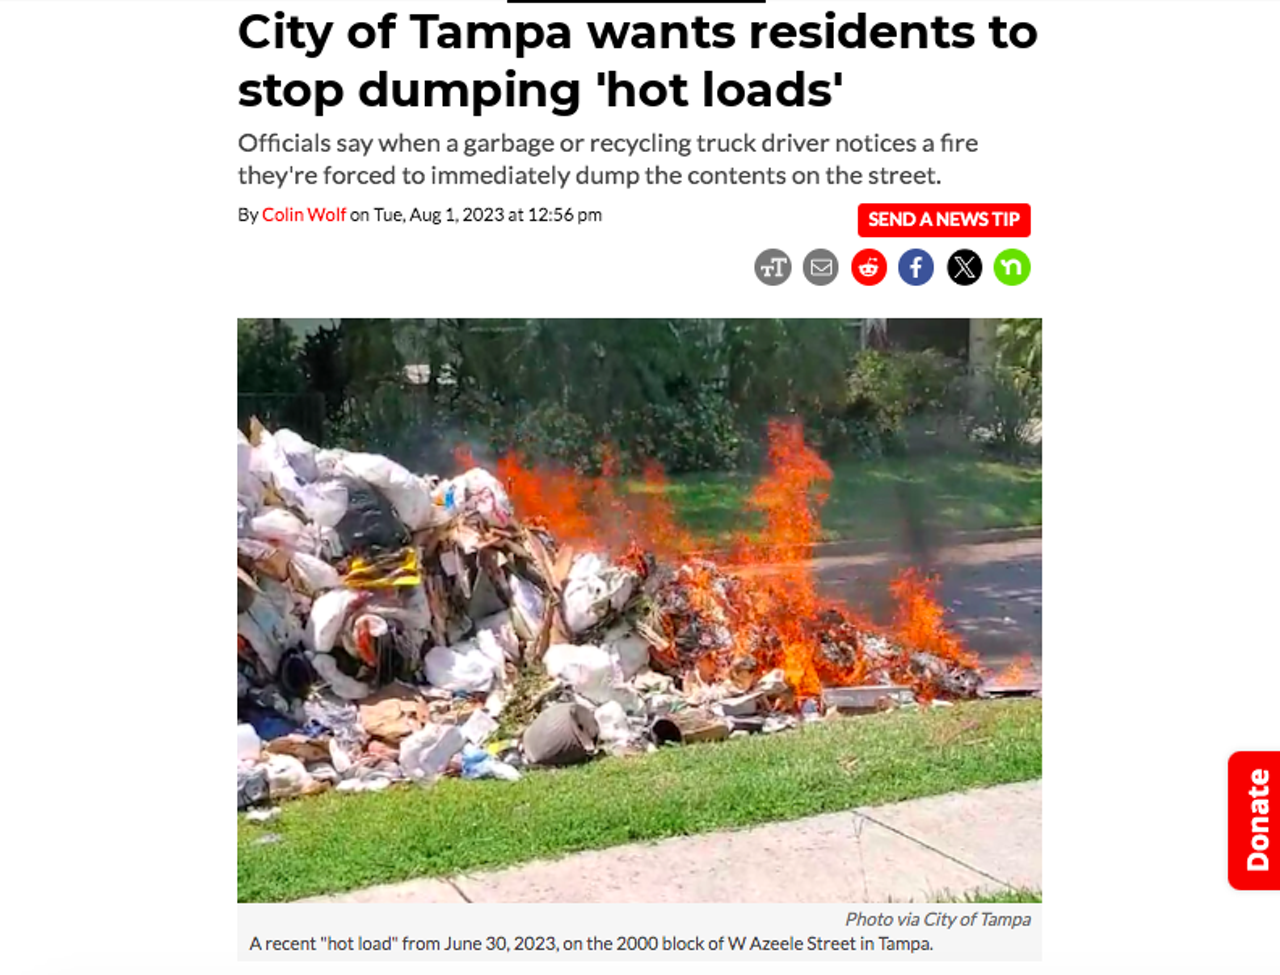 Last summer, the City of Tampa said there was an uptick in "hot loads," which is when trash spontaneously combusts inside a garbage truck, and now officials are looking to educate residents on how to properly dispose of their hazardous waste. The culprit? Overheating lithium-ion batteries, chemicals, cleaning solutions, propane tanks or other electronics improperly disposed of in bins, says the City of Tampa. Read the full story here. 